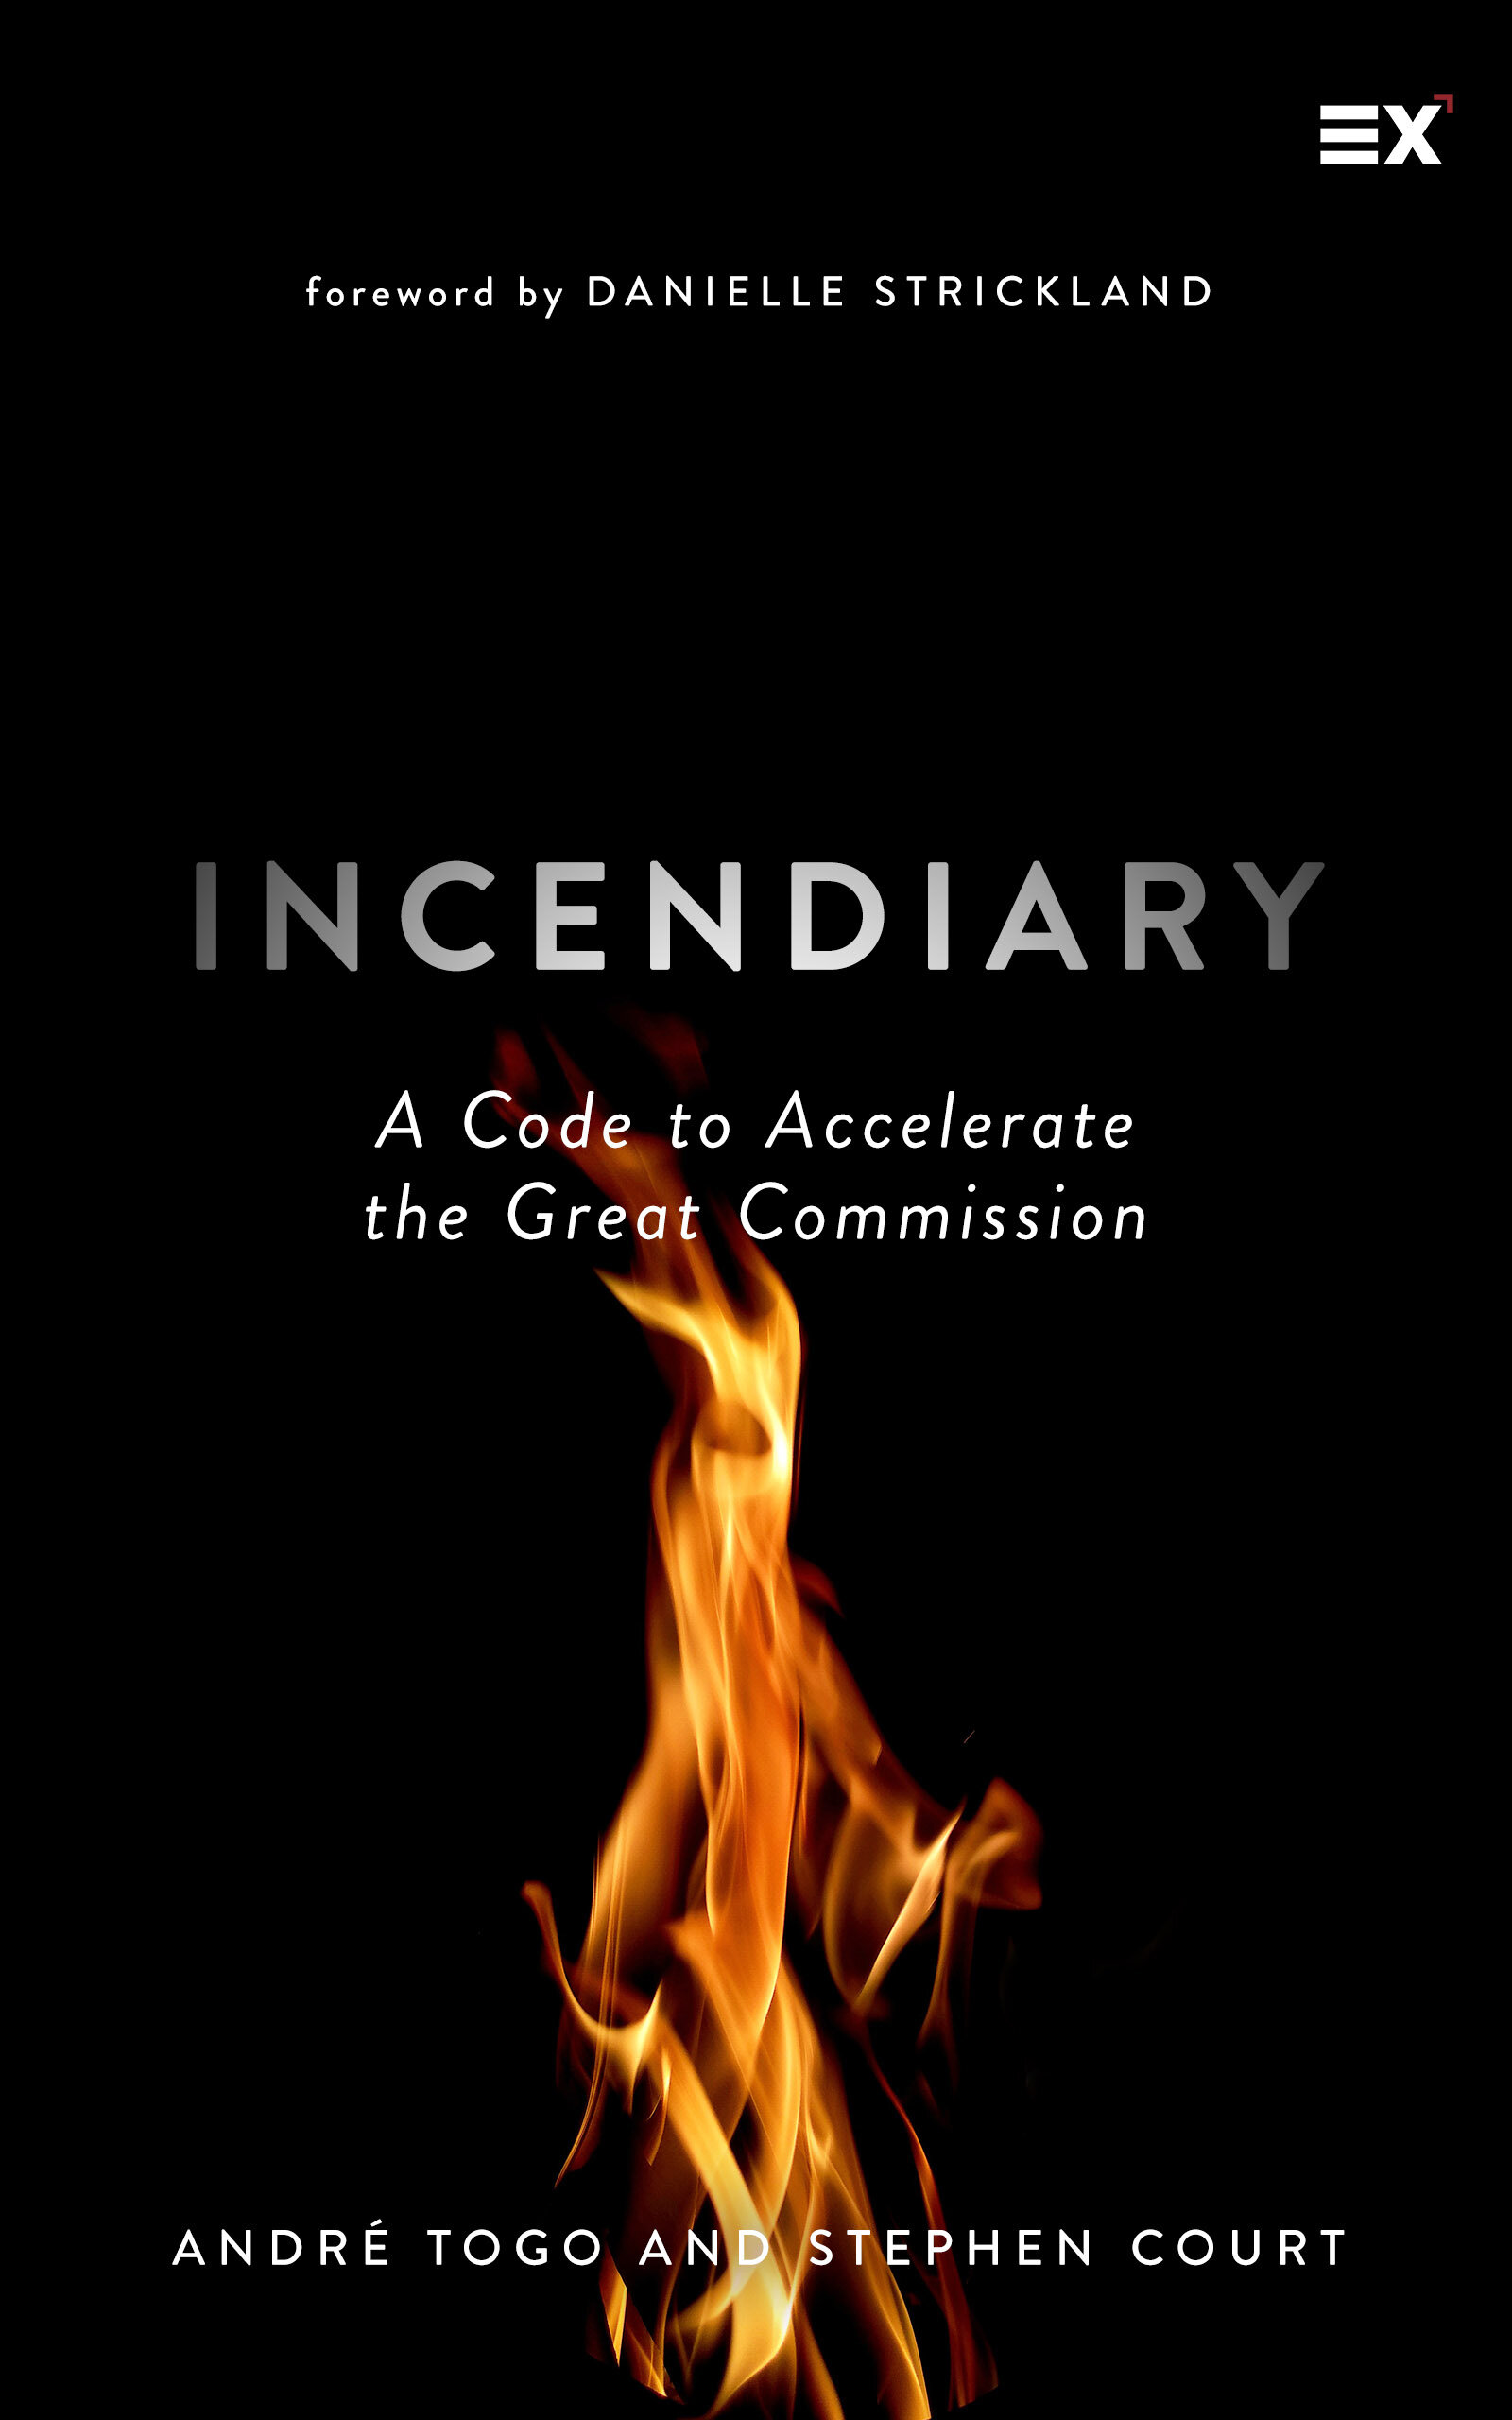 Incendiary: A Code to Accelerate the Great Commission